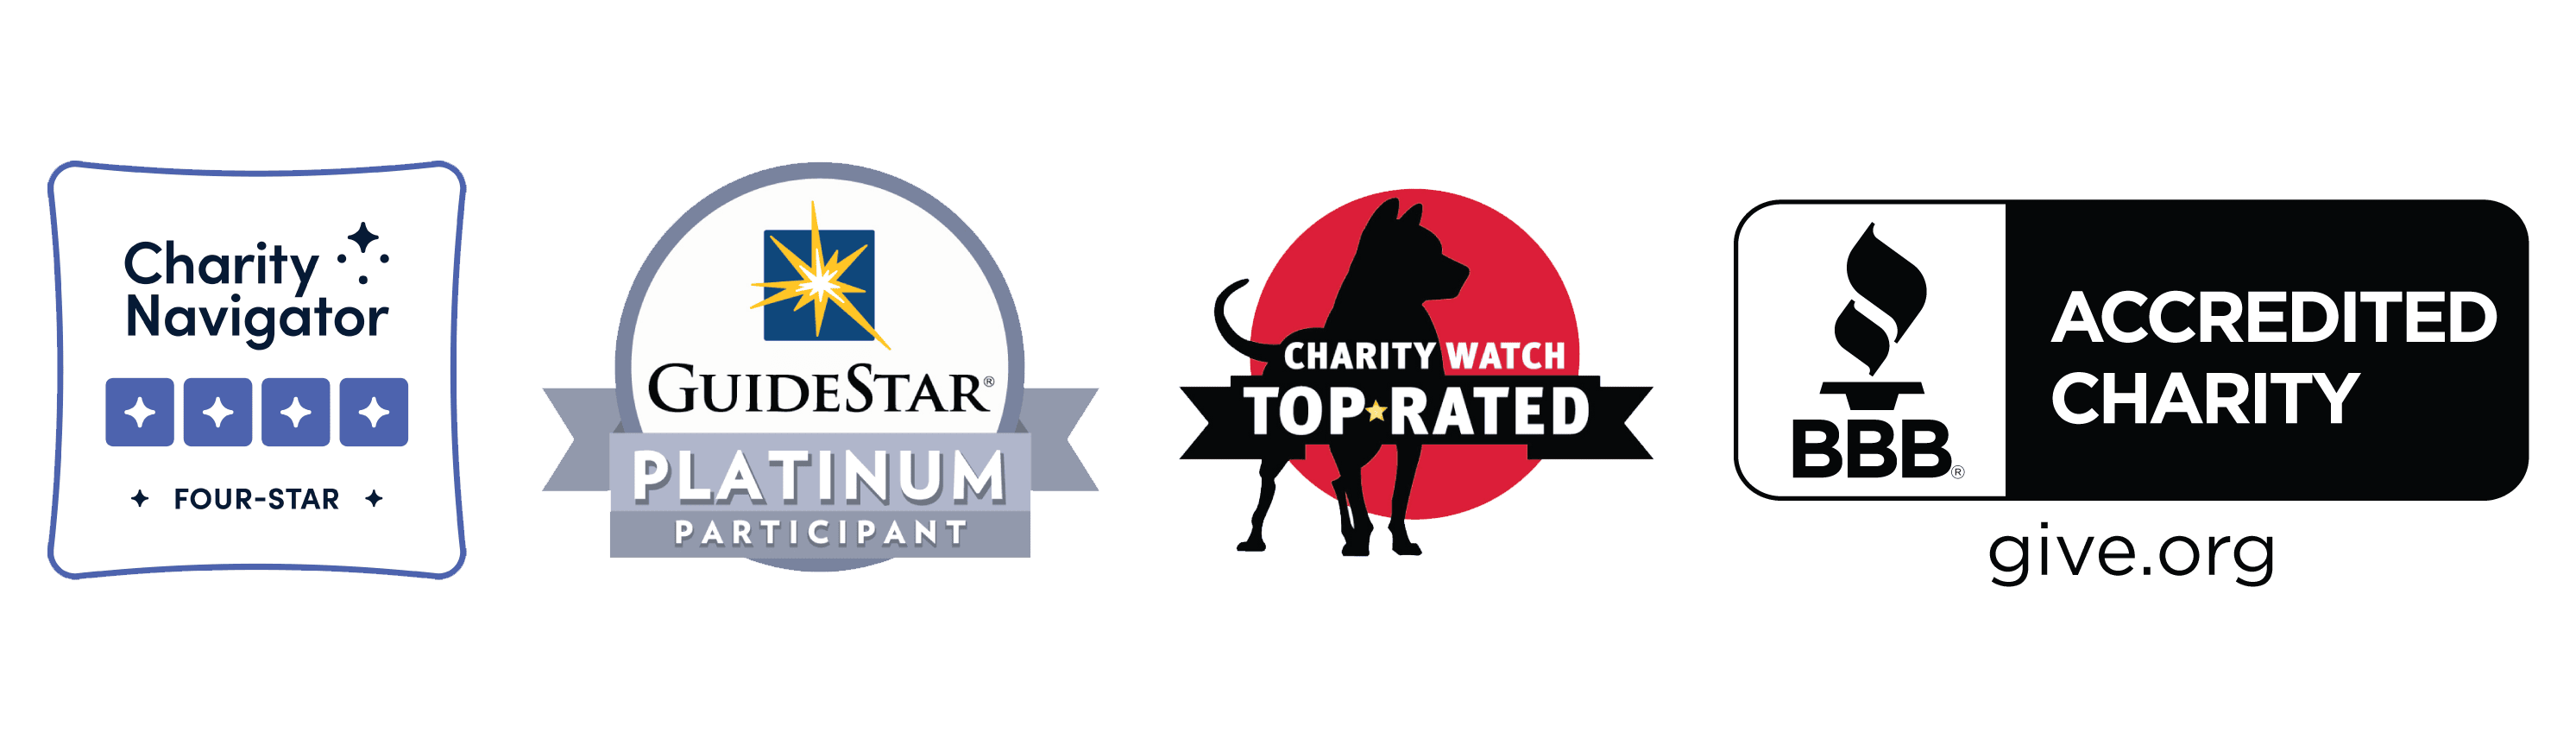 Homes For Our Troops is a top rated Veterans Charity